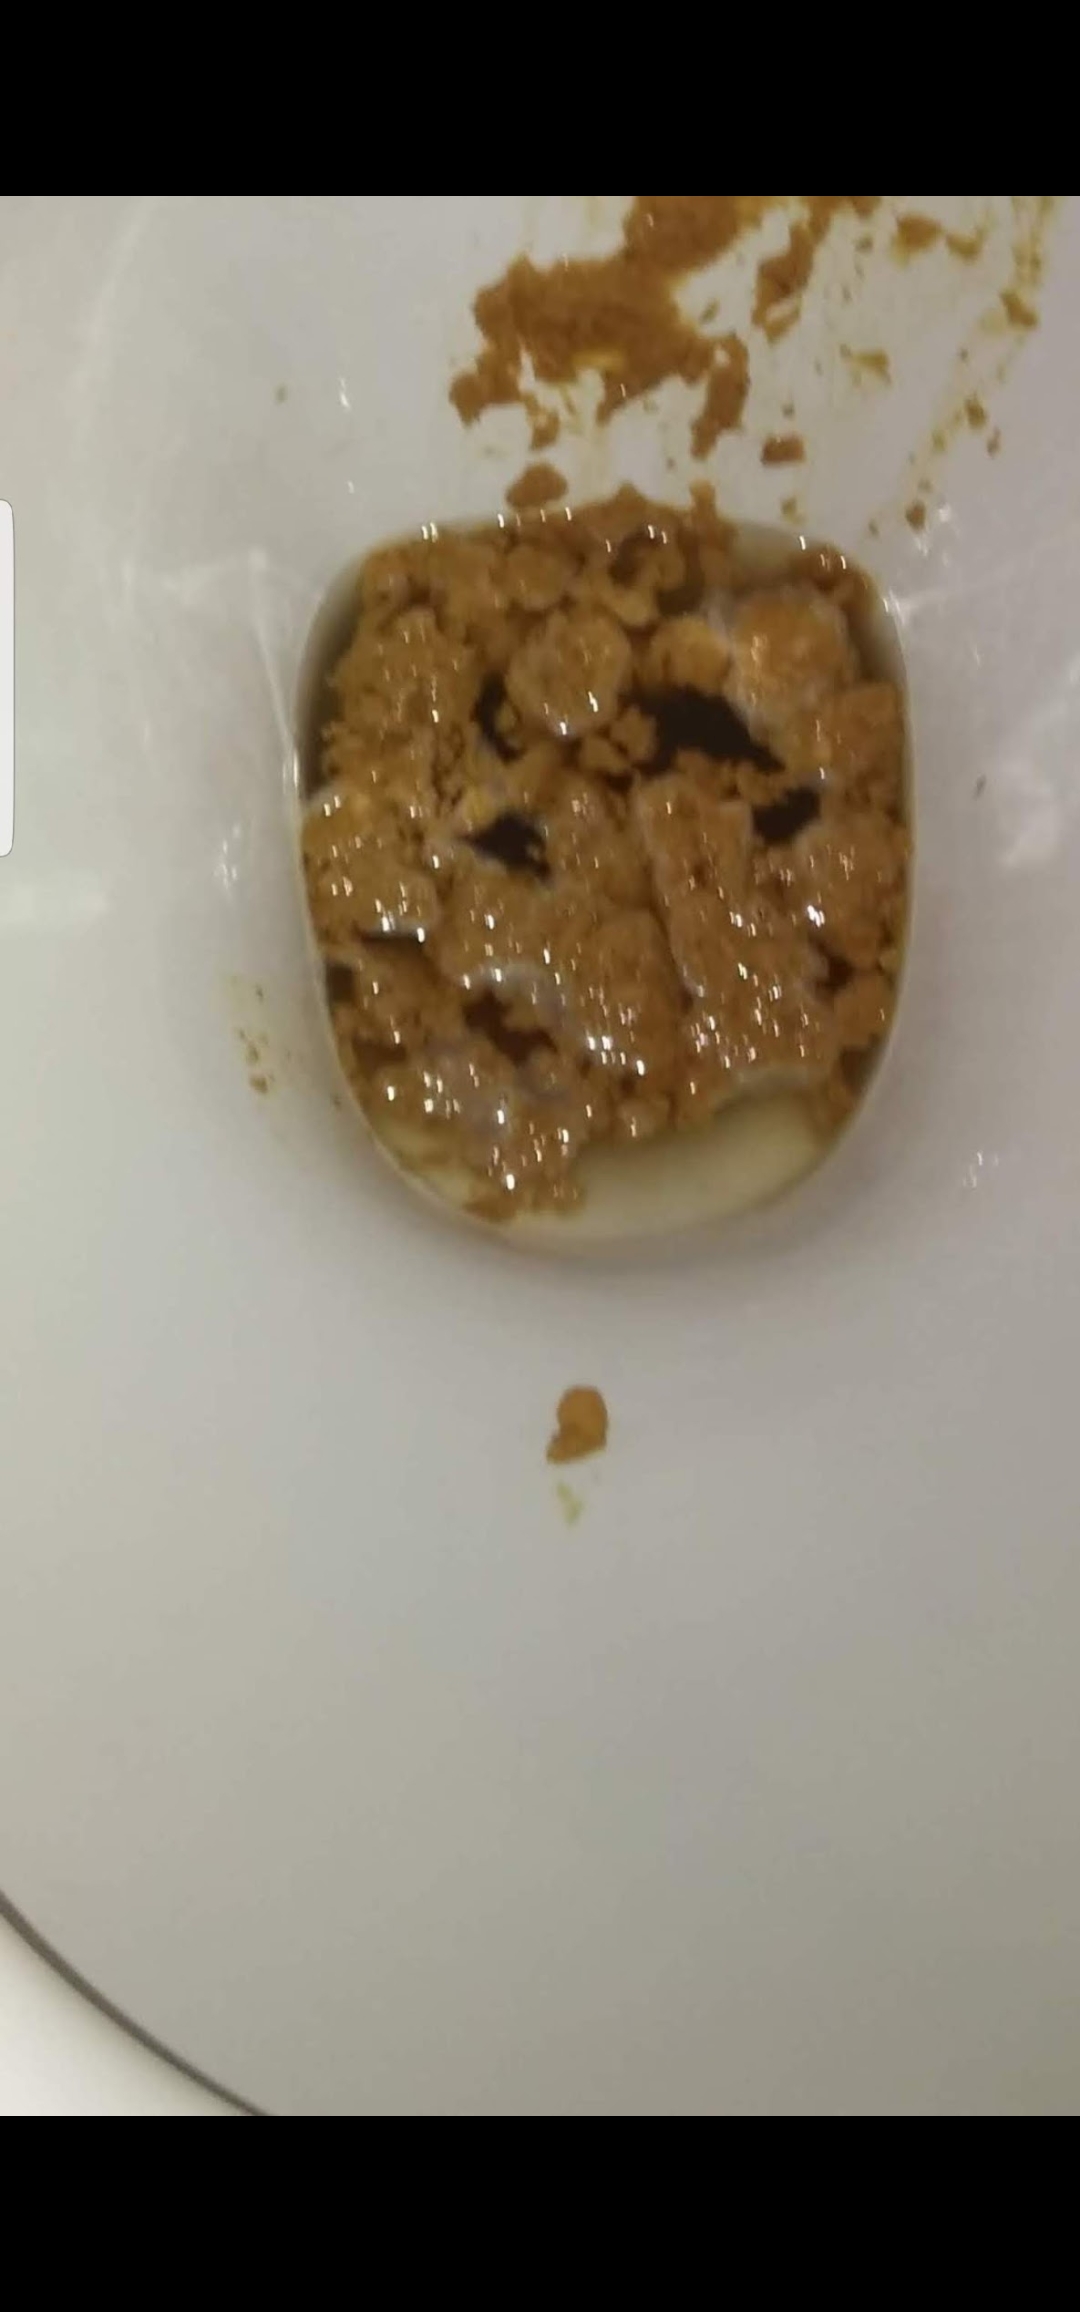 Desperate sloppy hungover shit on my mates loo